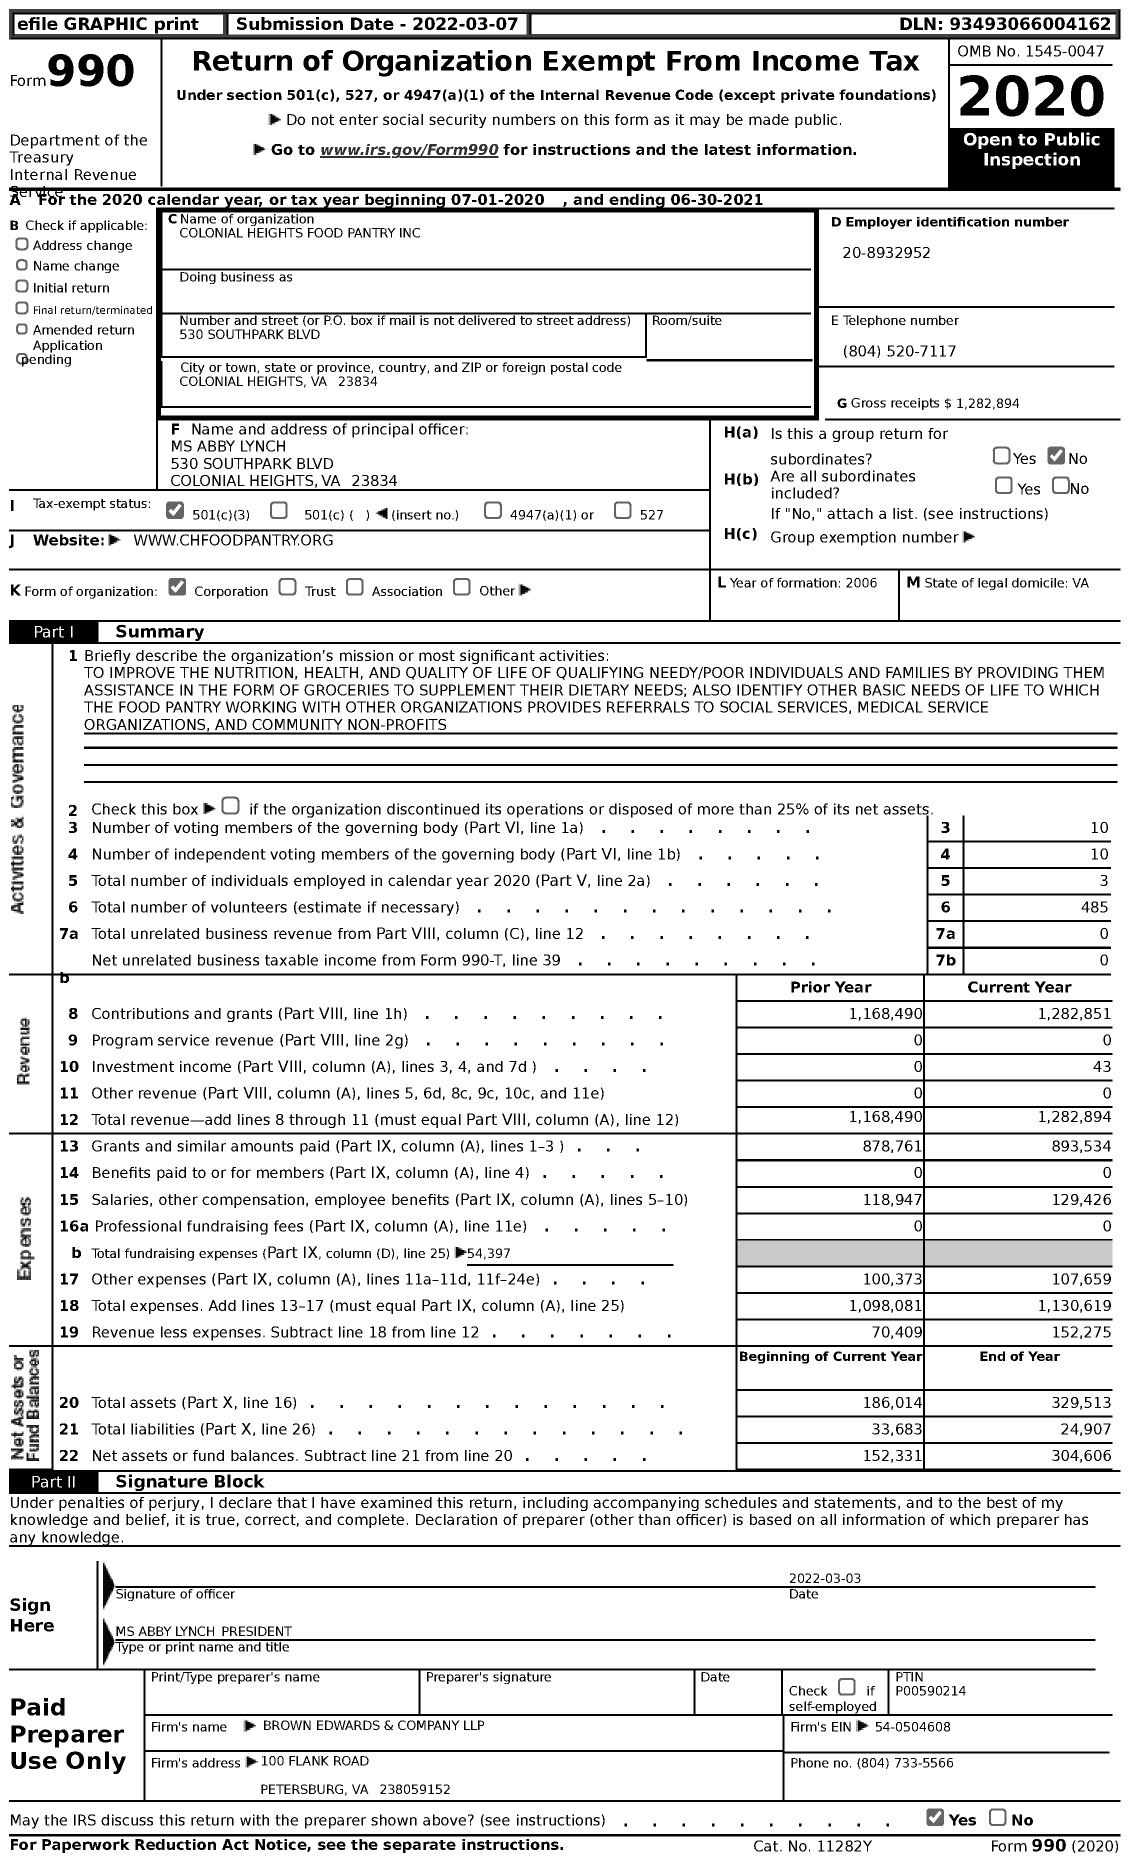 Image of first page of 2020 Form 990 for Colonial Heights Food Pantry (CHFP)